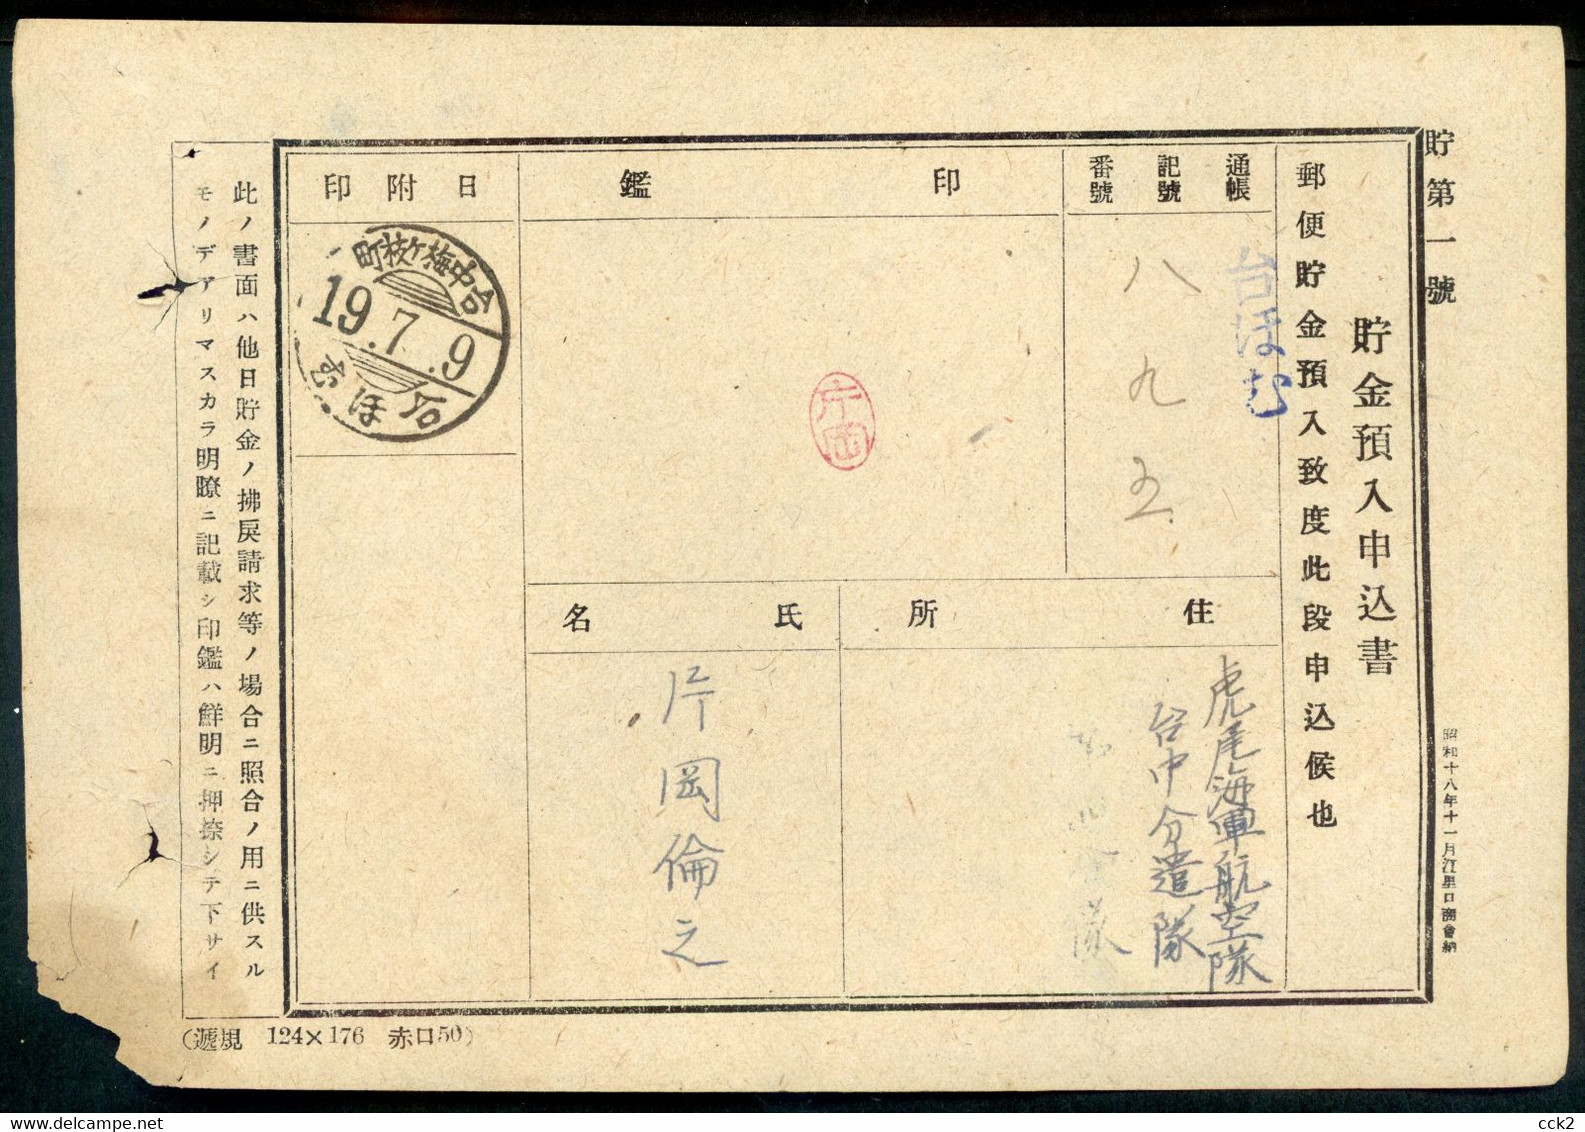 JAPAN OCCUPATION TAIWAN- Postal Convenience Savings Fund Advance Deposit Application Form (2) - 1945 Occupazione Giapponese